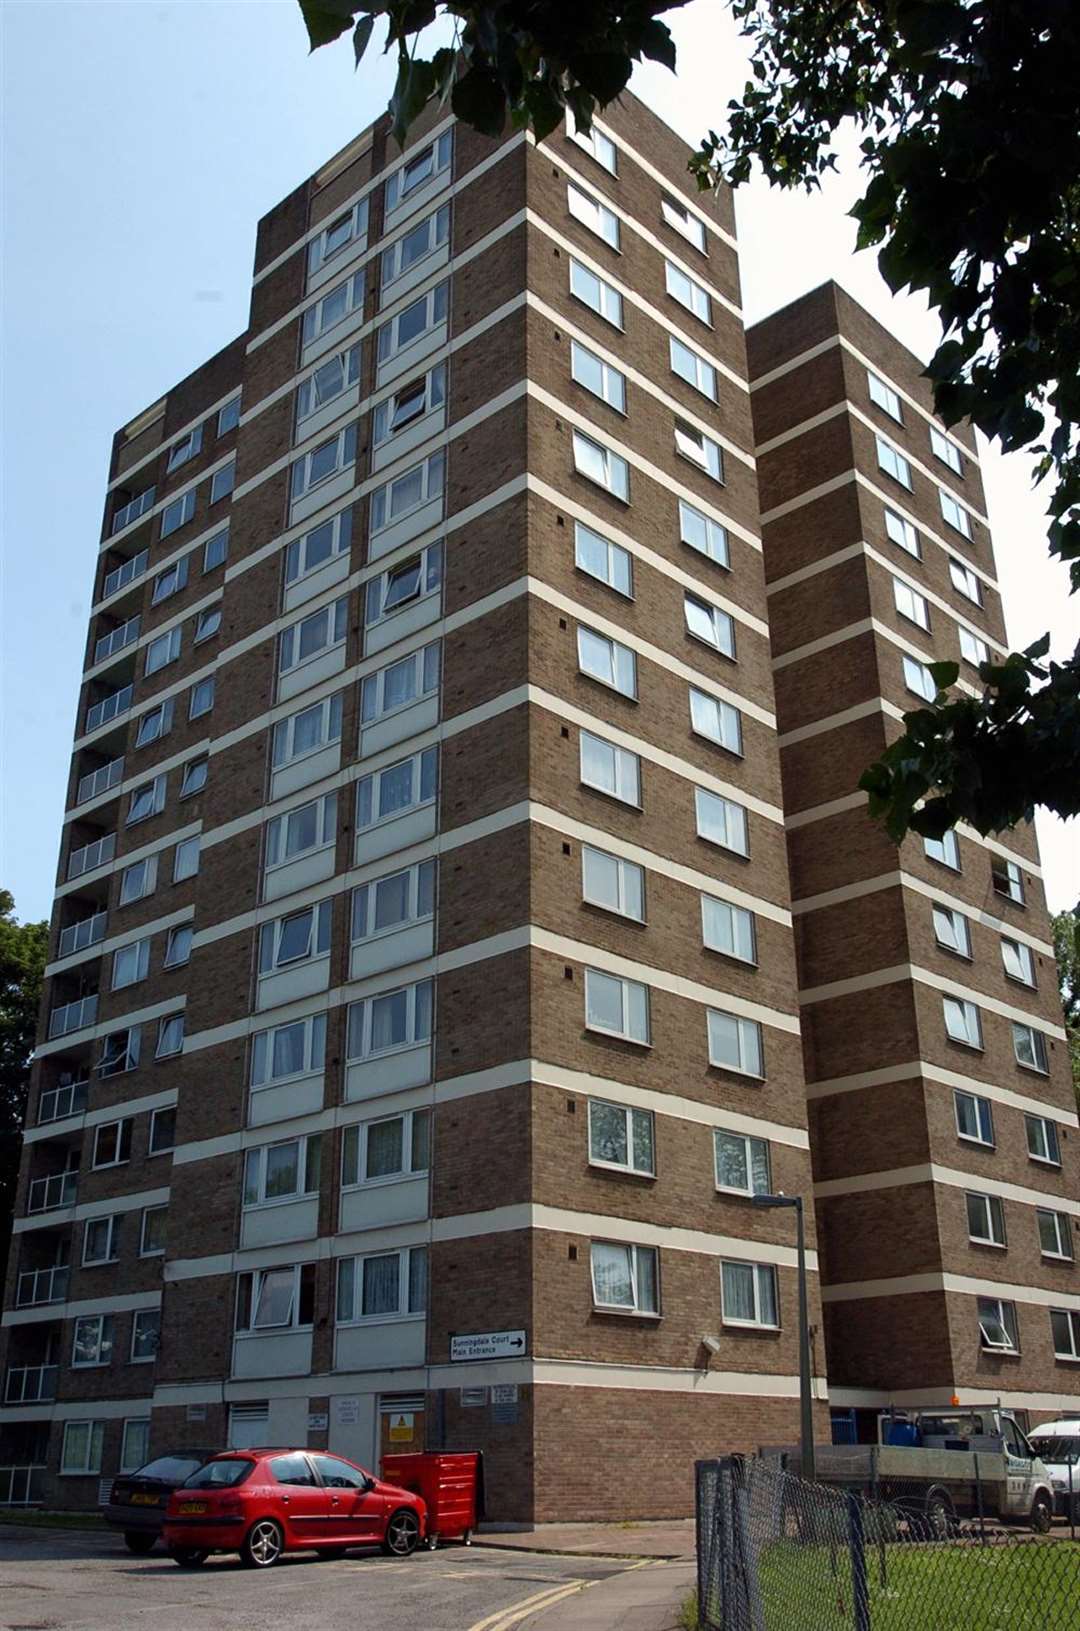 Sunningdale Court in Square Hill Road, Maidstone